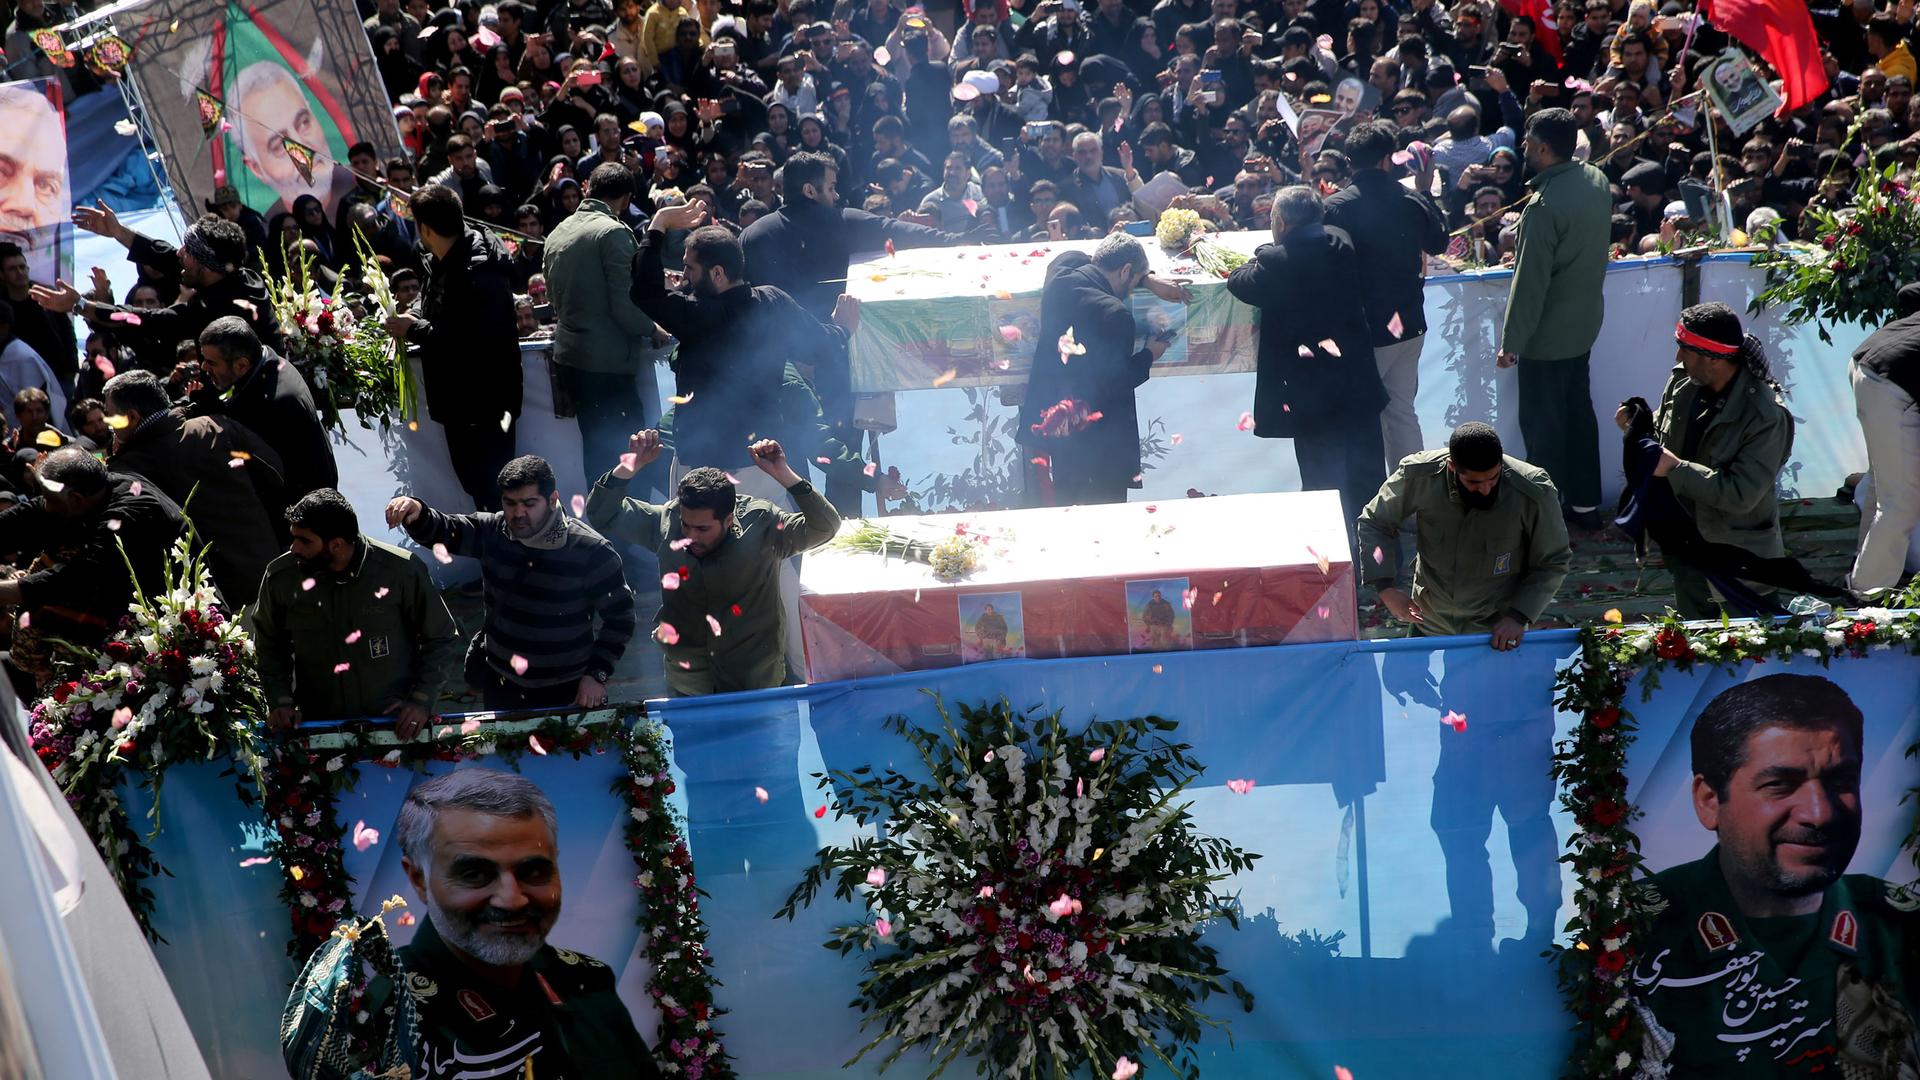 Iranian people attend a funeral procession and burial for Iranian Major-General Qasem Soleimani, head of the elite Quds Force, who was killed in an airstrike at Baghdad airport, at his hometown in Kerman, Iran, Jan. 7, 2020.